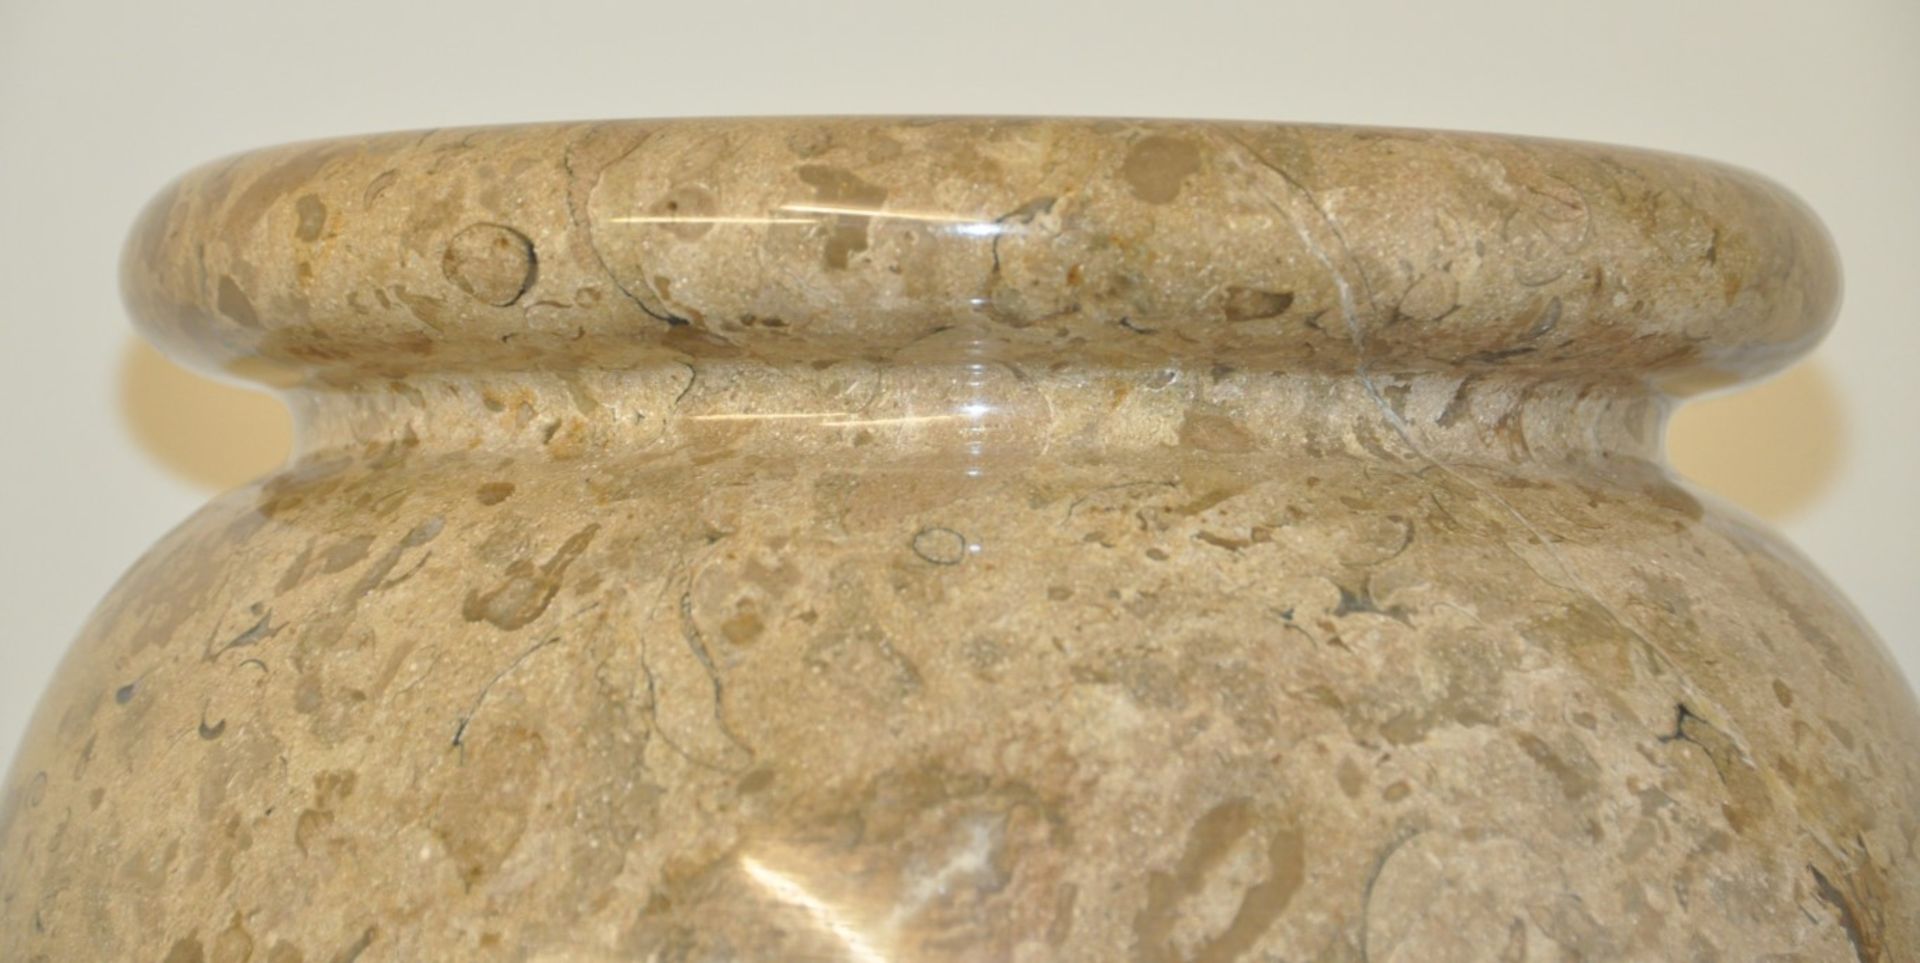 1 x Large Decorative Carved Natural Fossil Stone Vase - Gorgeous Glossy Marbled Finish - 3FT - Image 2 of 6